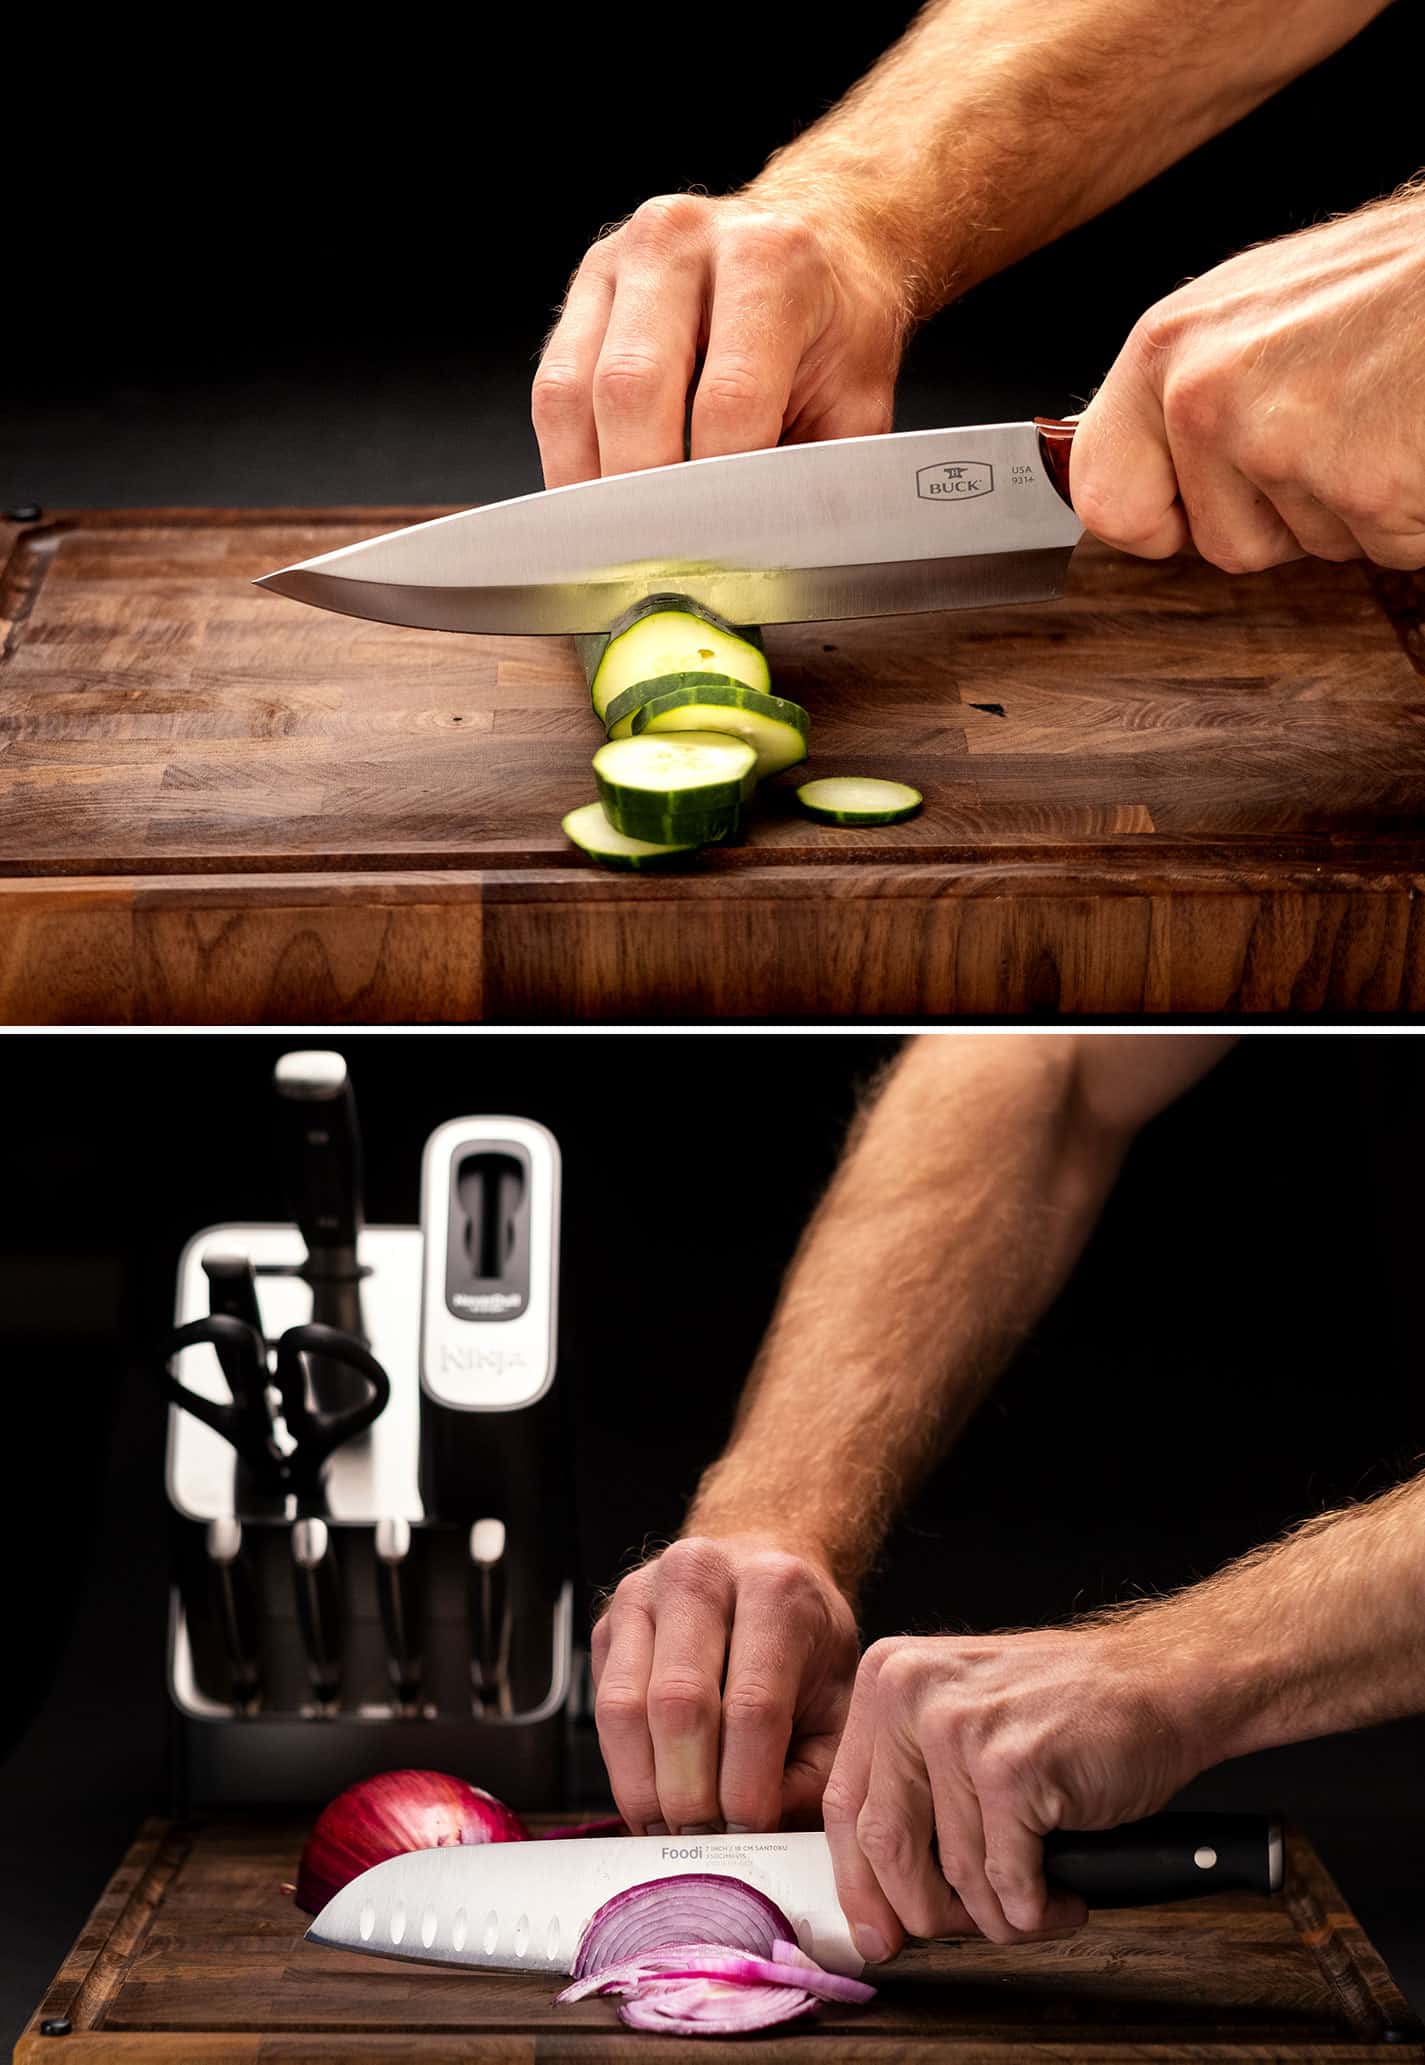 The 6 best knife sets for your kitchen in 2022, per reviews